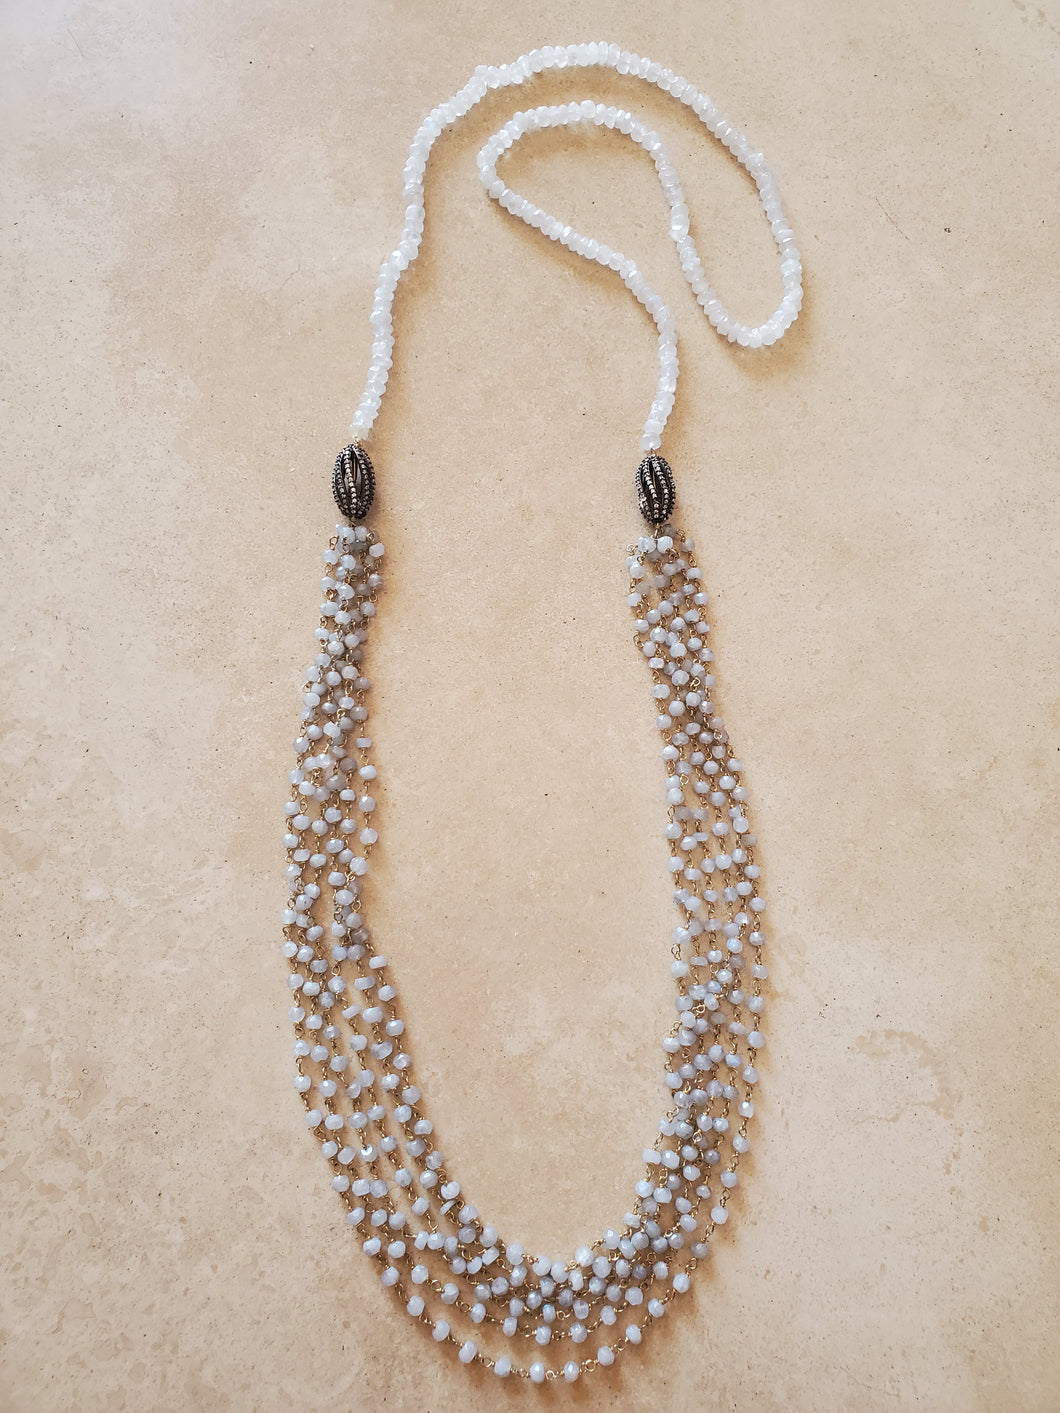 Long Moonstone Necklace with Silver Bead Accent